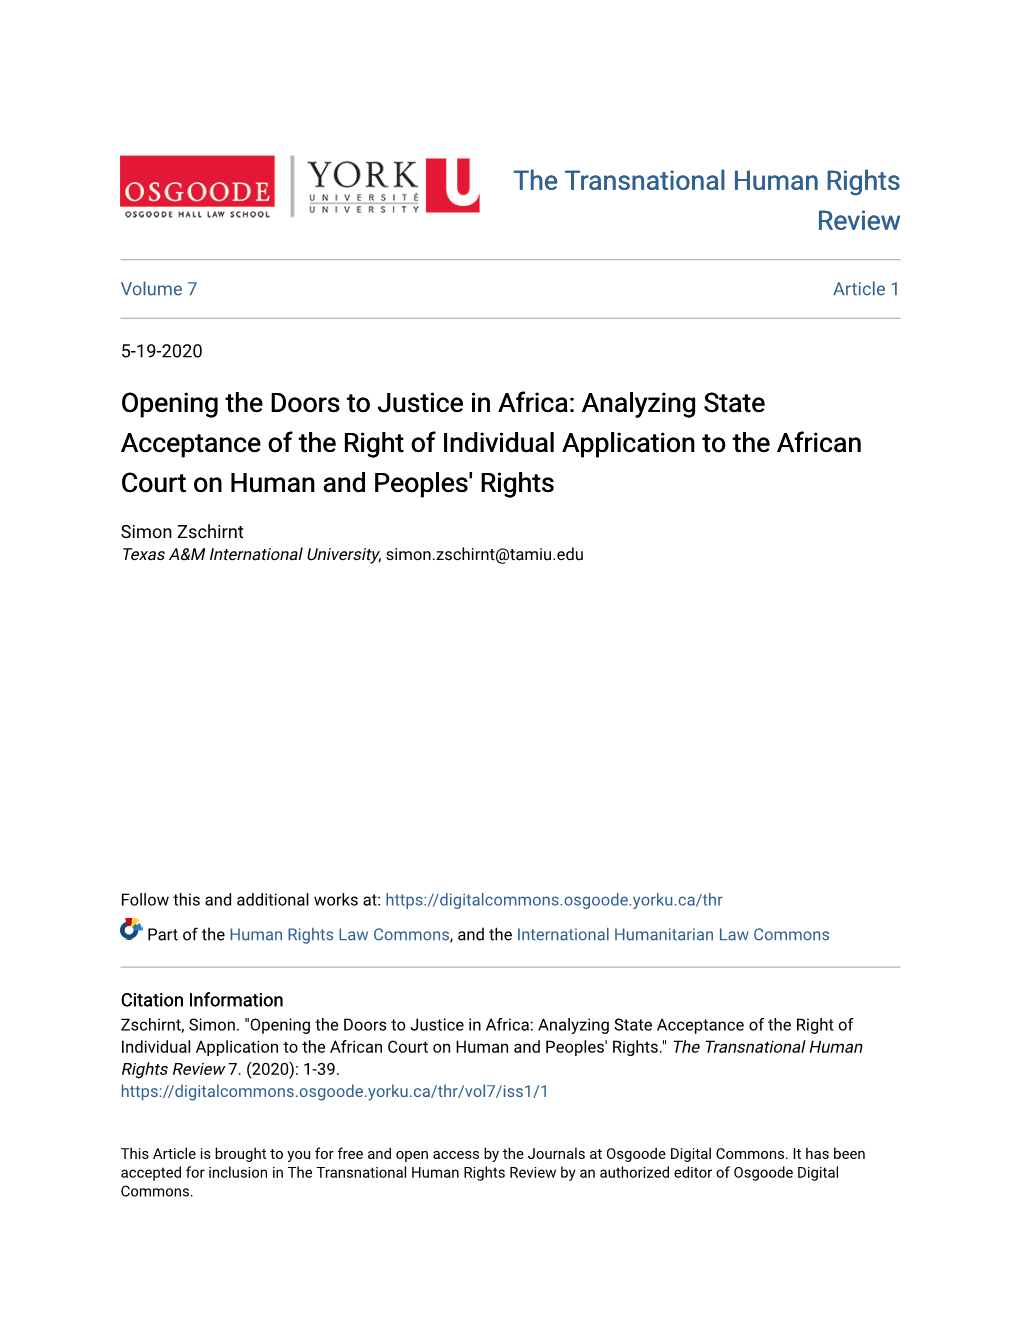 Opening the Doors to Justice in Africa: Analyzing State Acceptance of the Right of Individual Application to the African Court on Human and Peoples' Rights